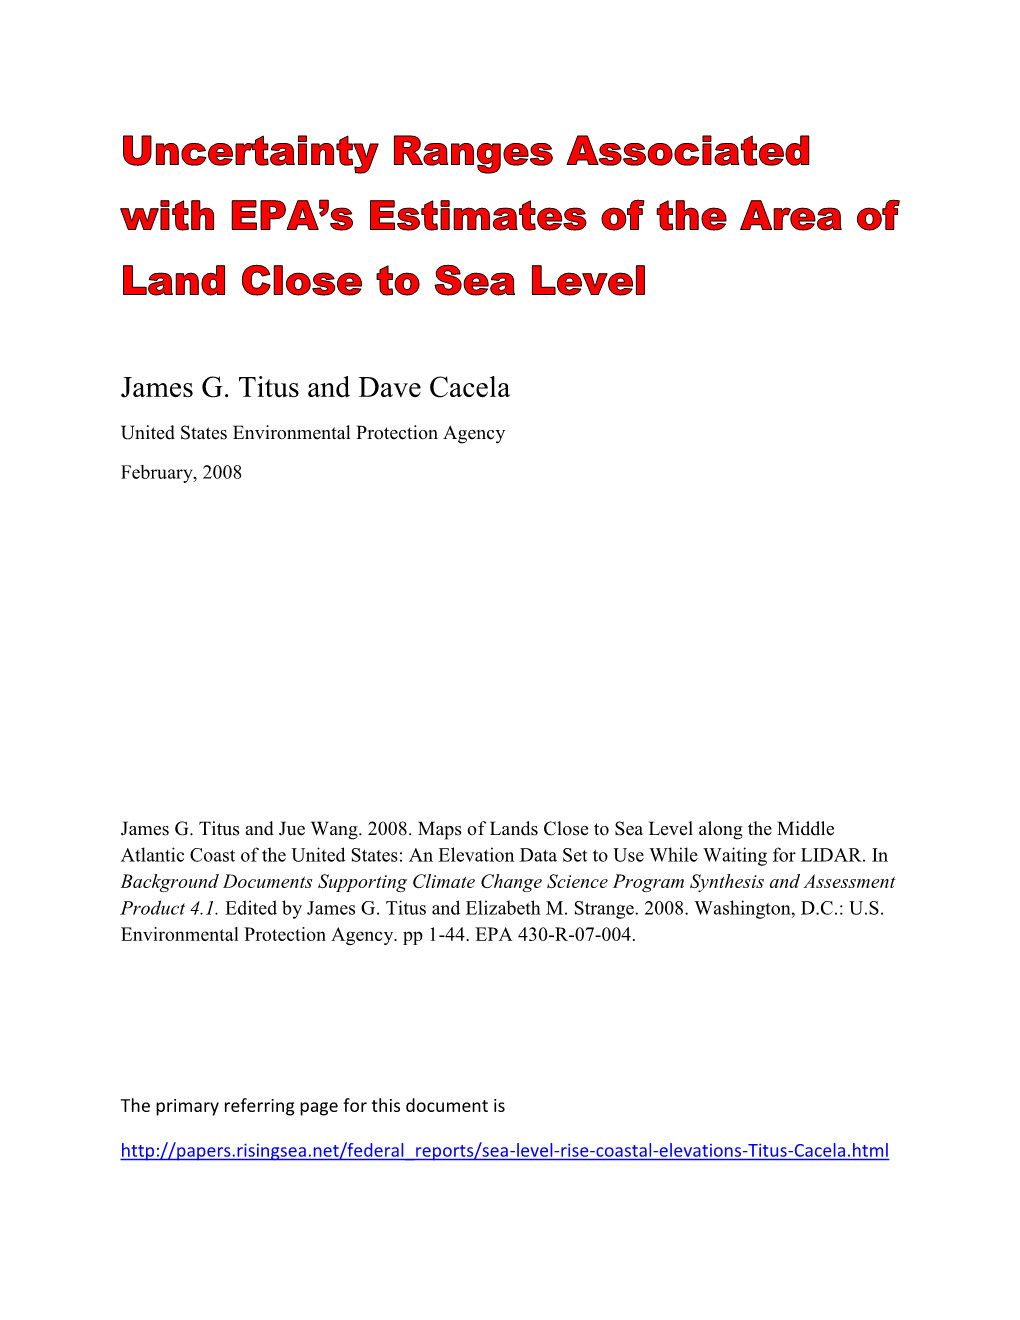 Uncertainty Ranges Associated with EPA's Estimates of the Area of Land